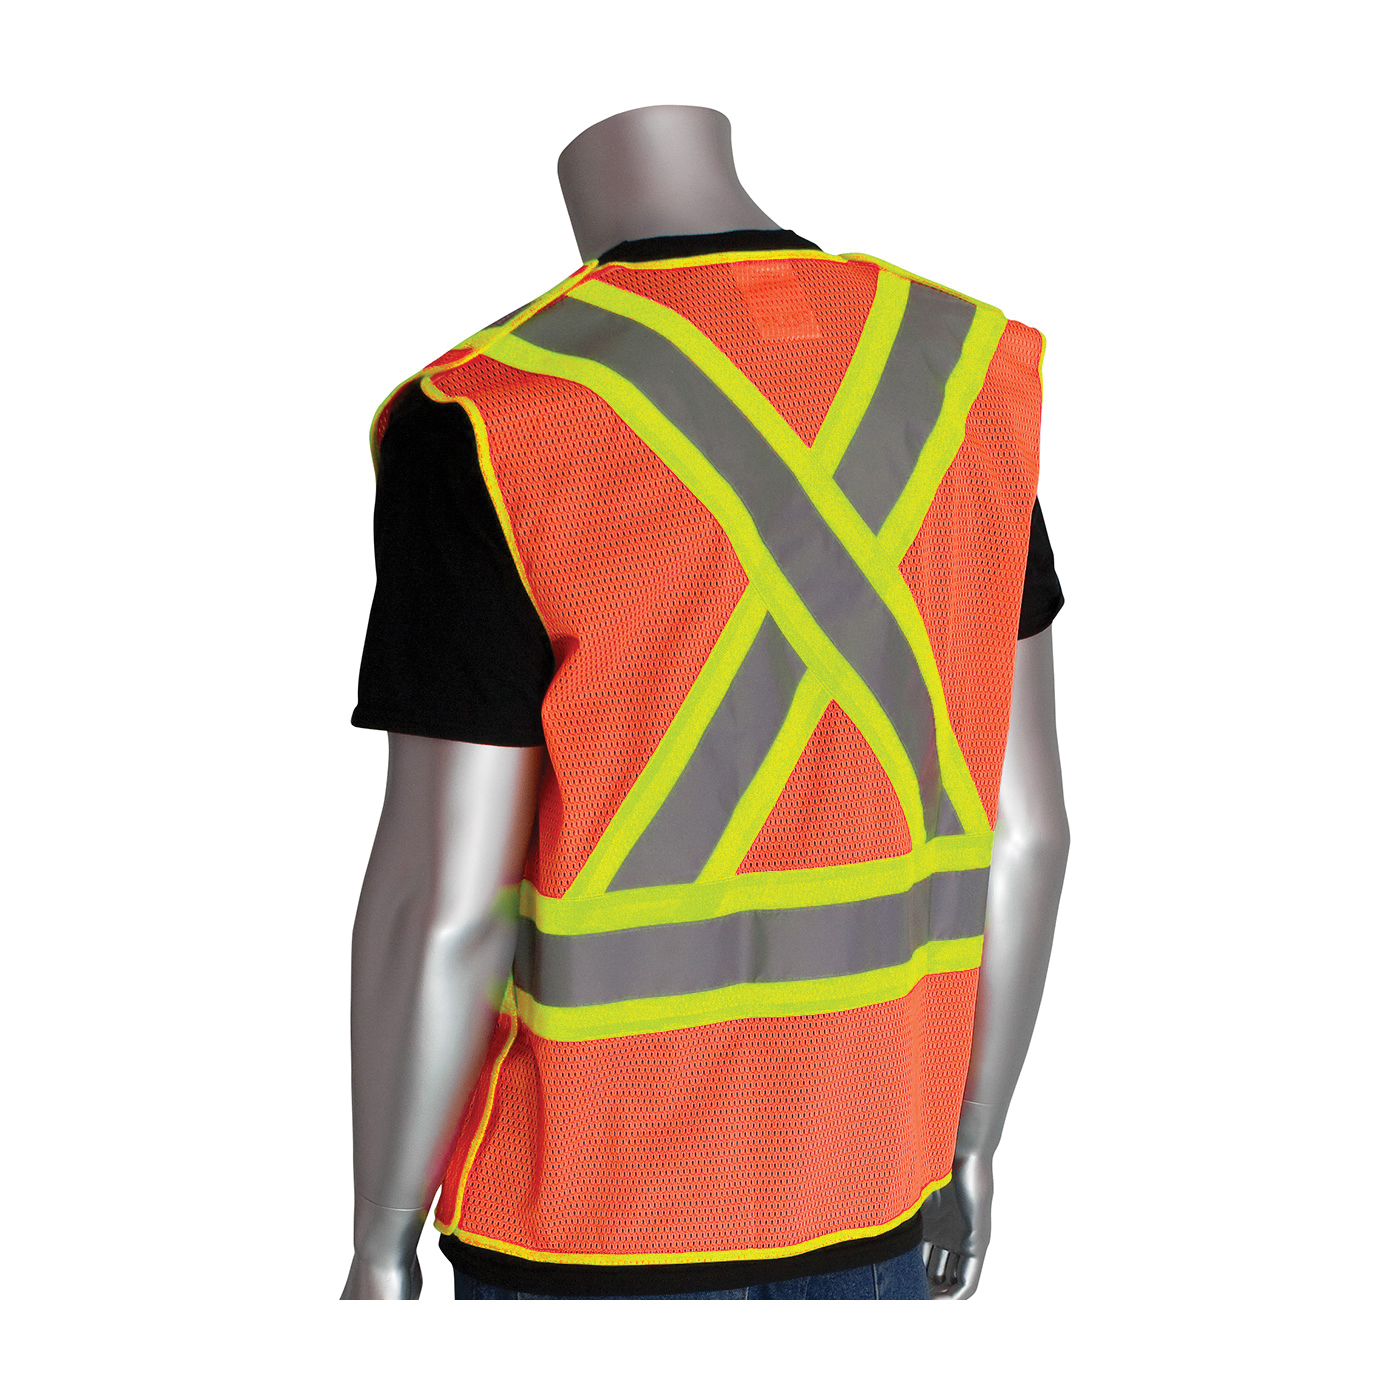 PIP® 302-0211-OR/6X 2-Tone X-Back Safety Vest, 6XL, Hi-Viz Orange, Polyester Mesh, Hook and Loop Closure, 5 Pockets, ANSI Class: Class 2, Specifications Met: ANSI 107 Type R, CAN/CSA Z96